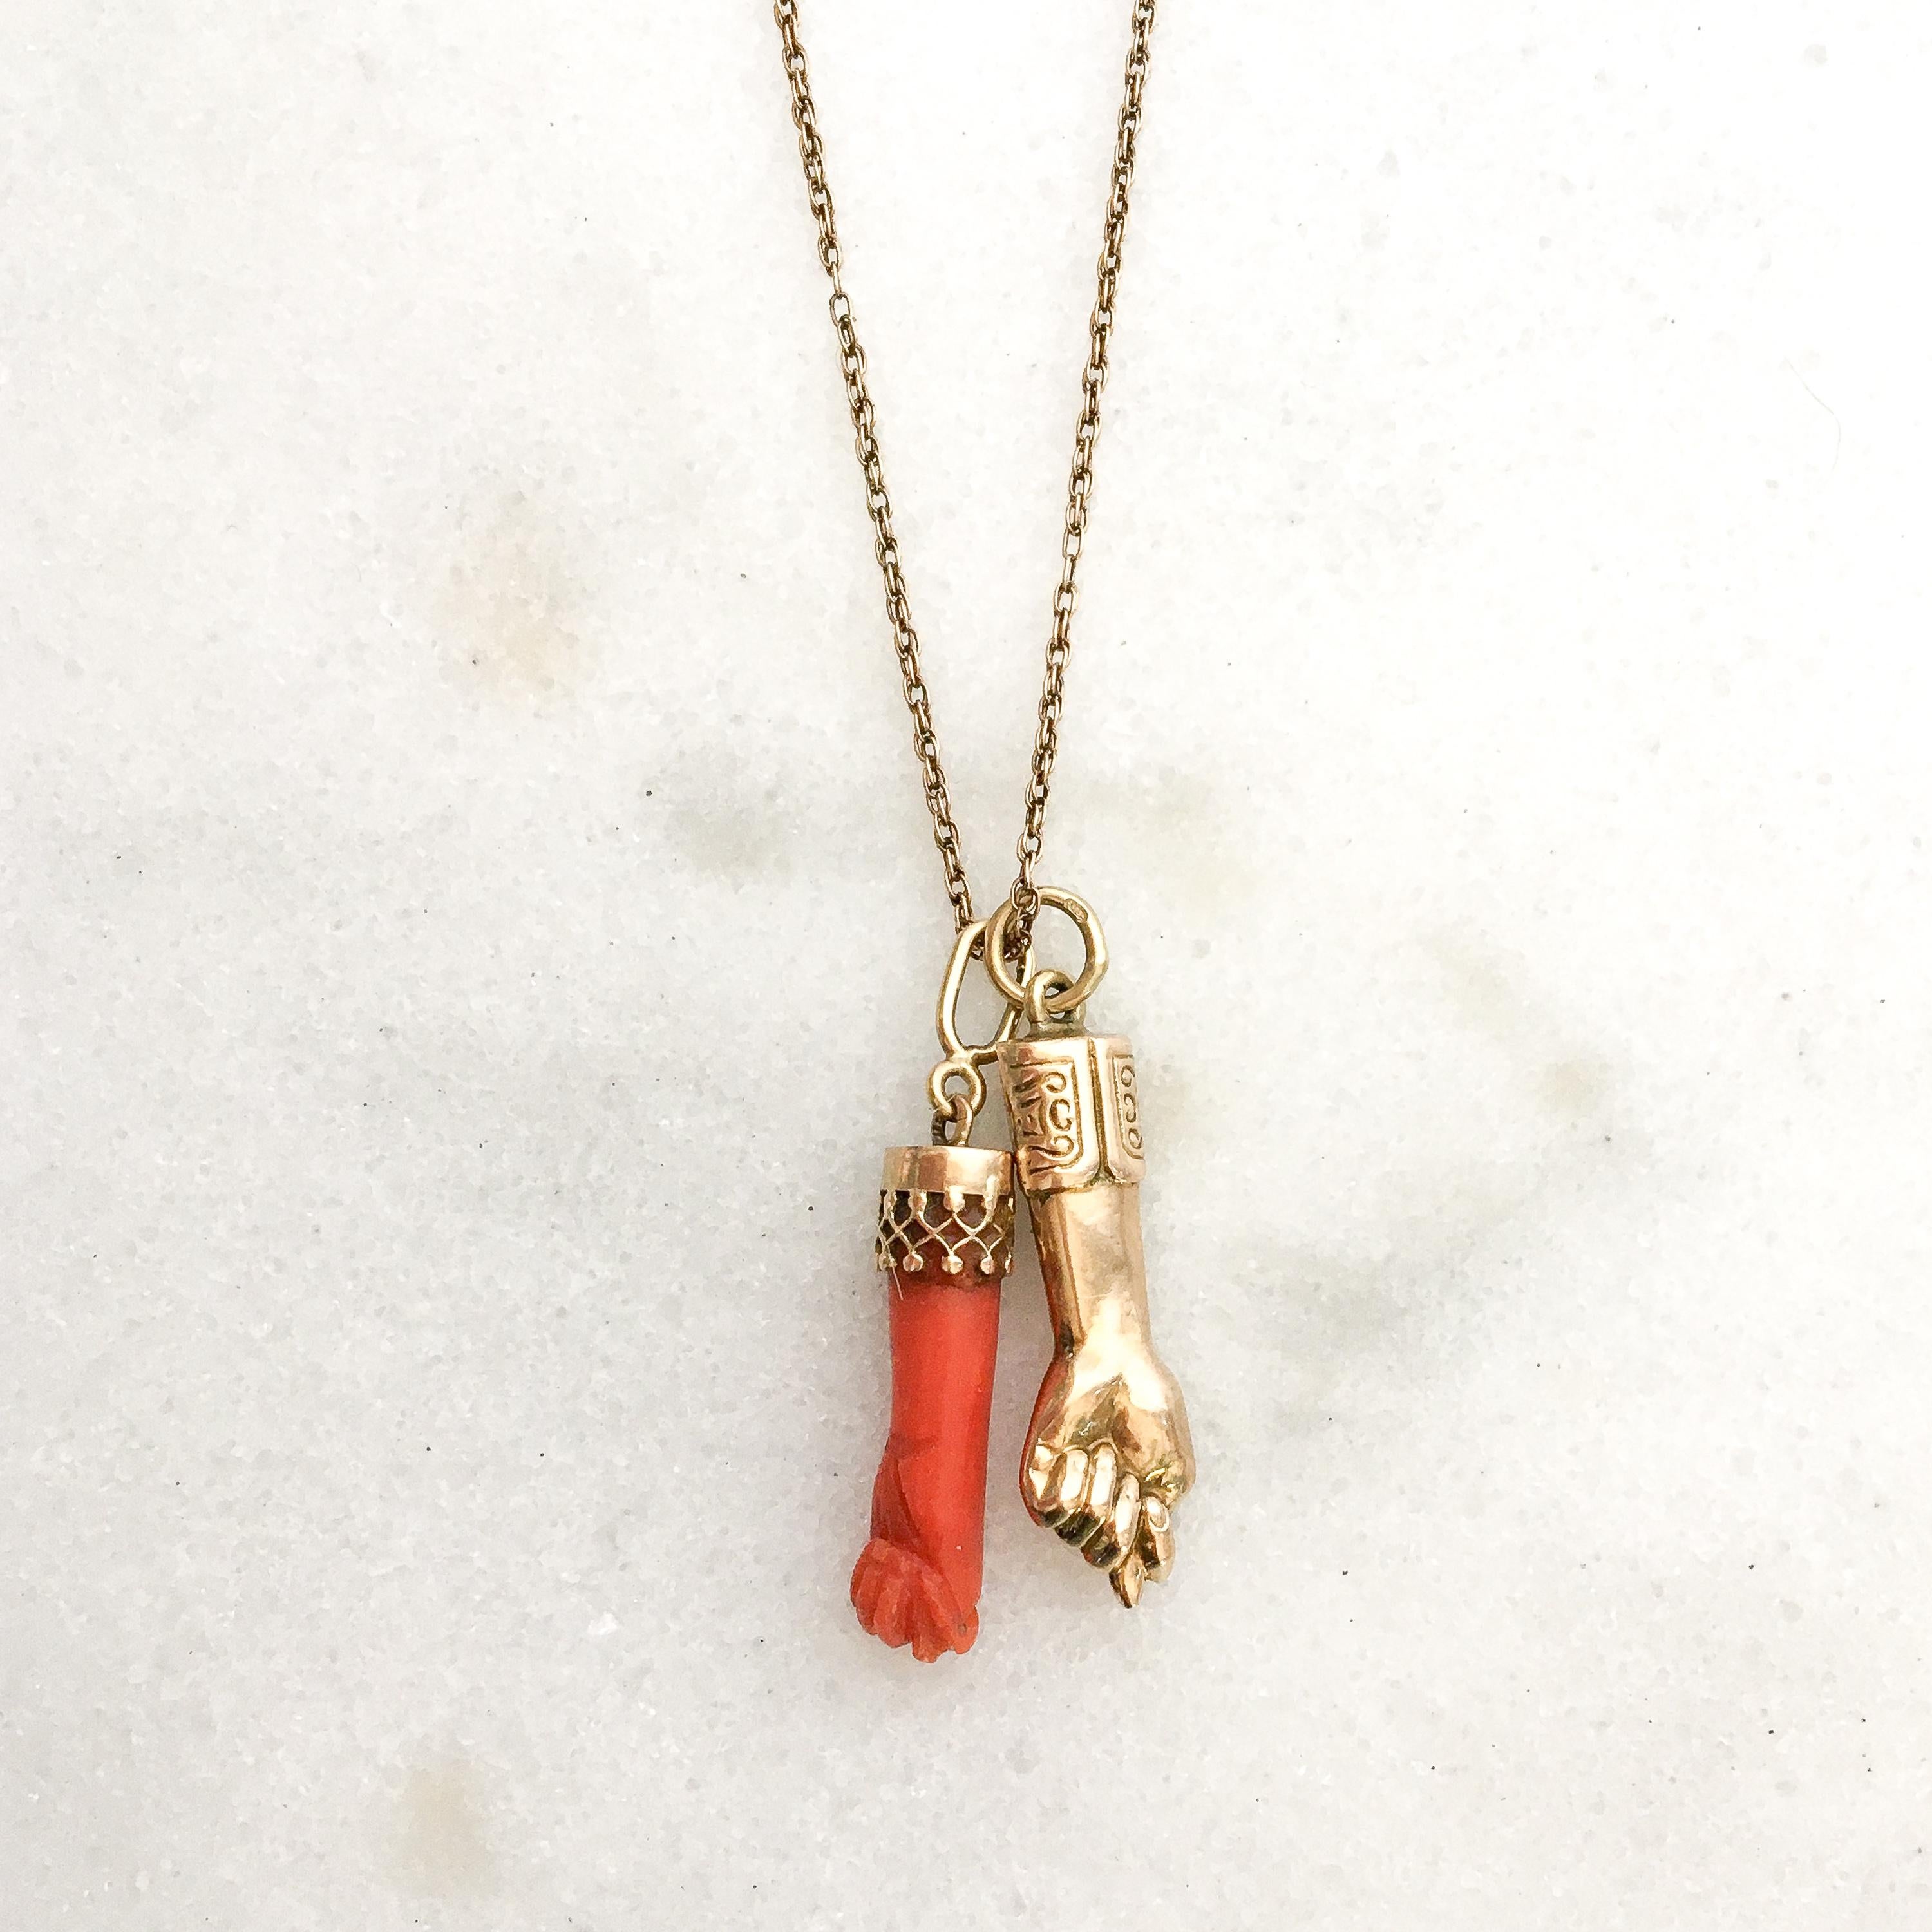 A Victorian red *coral figa hand charm set with a gorgeous 14 karat gold open-worked bail. The hand is beautifully detailed. The charm is great worn alone or layered with your other favorites. The charm comes without the necklace. 

The figa hand